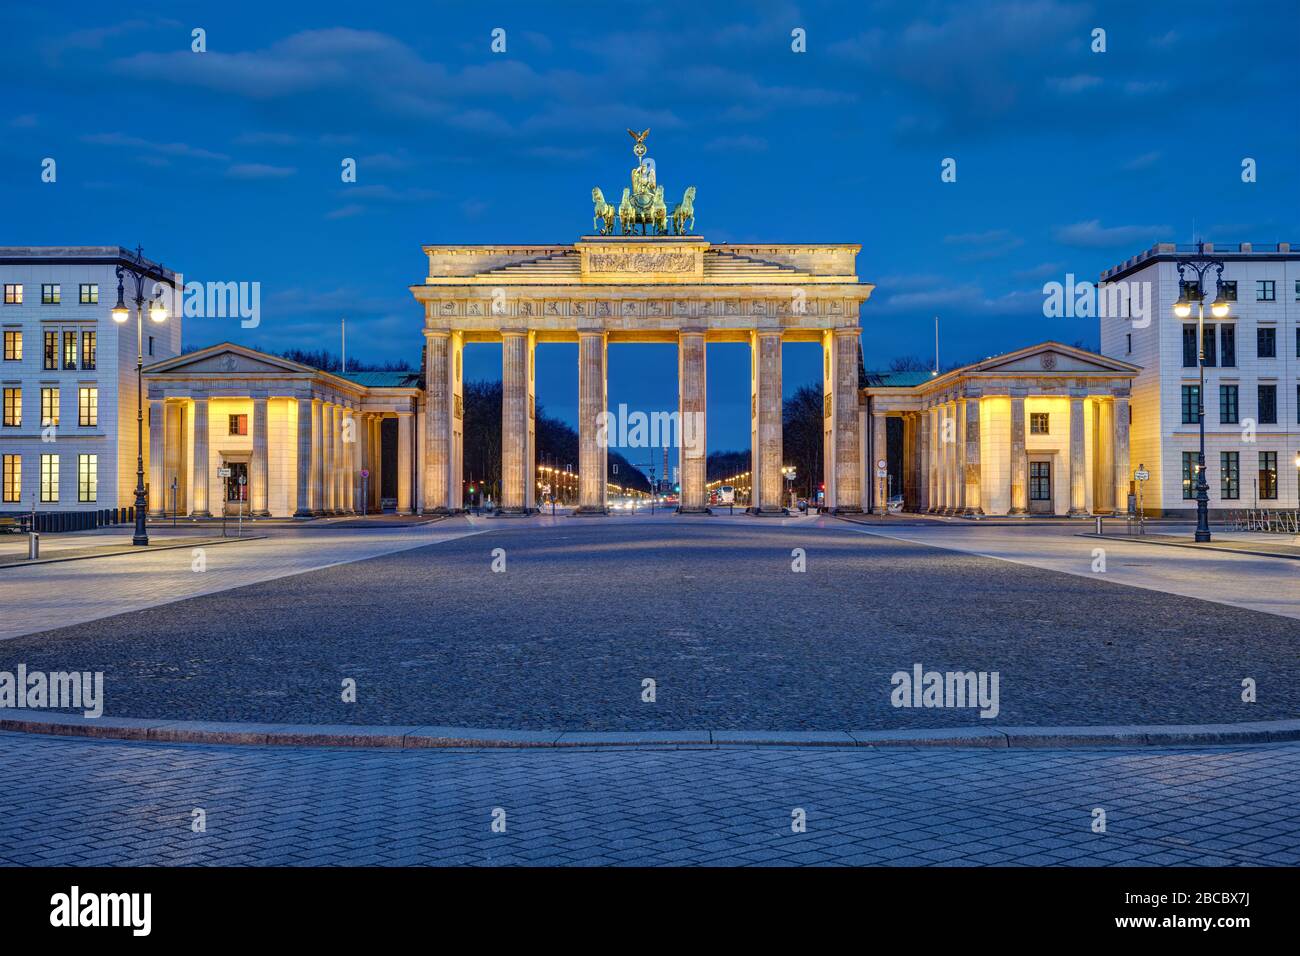 Panorama of the illuminated Brandenburger Tor in Berlin at dawn with no people Stock Photo